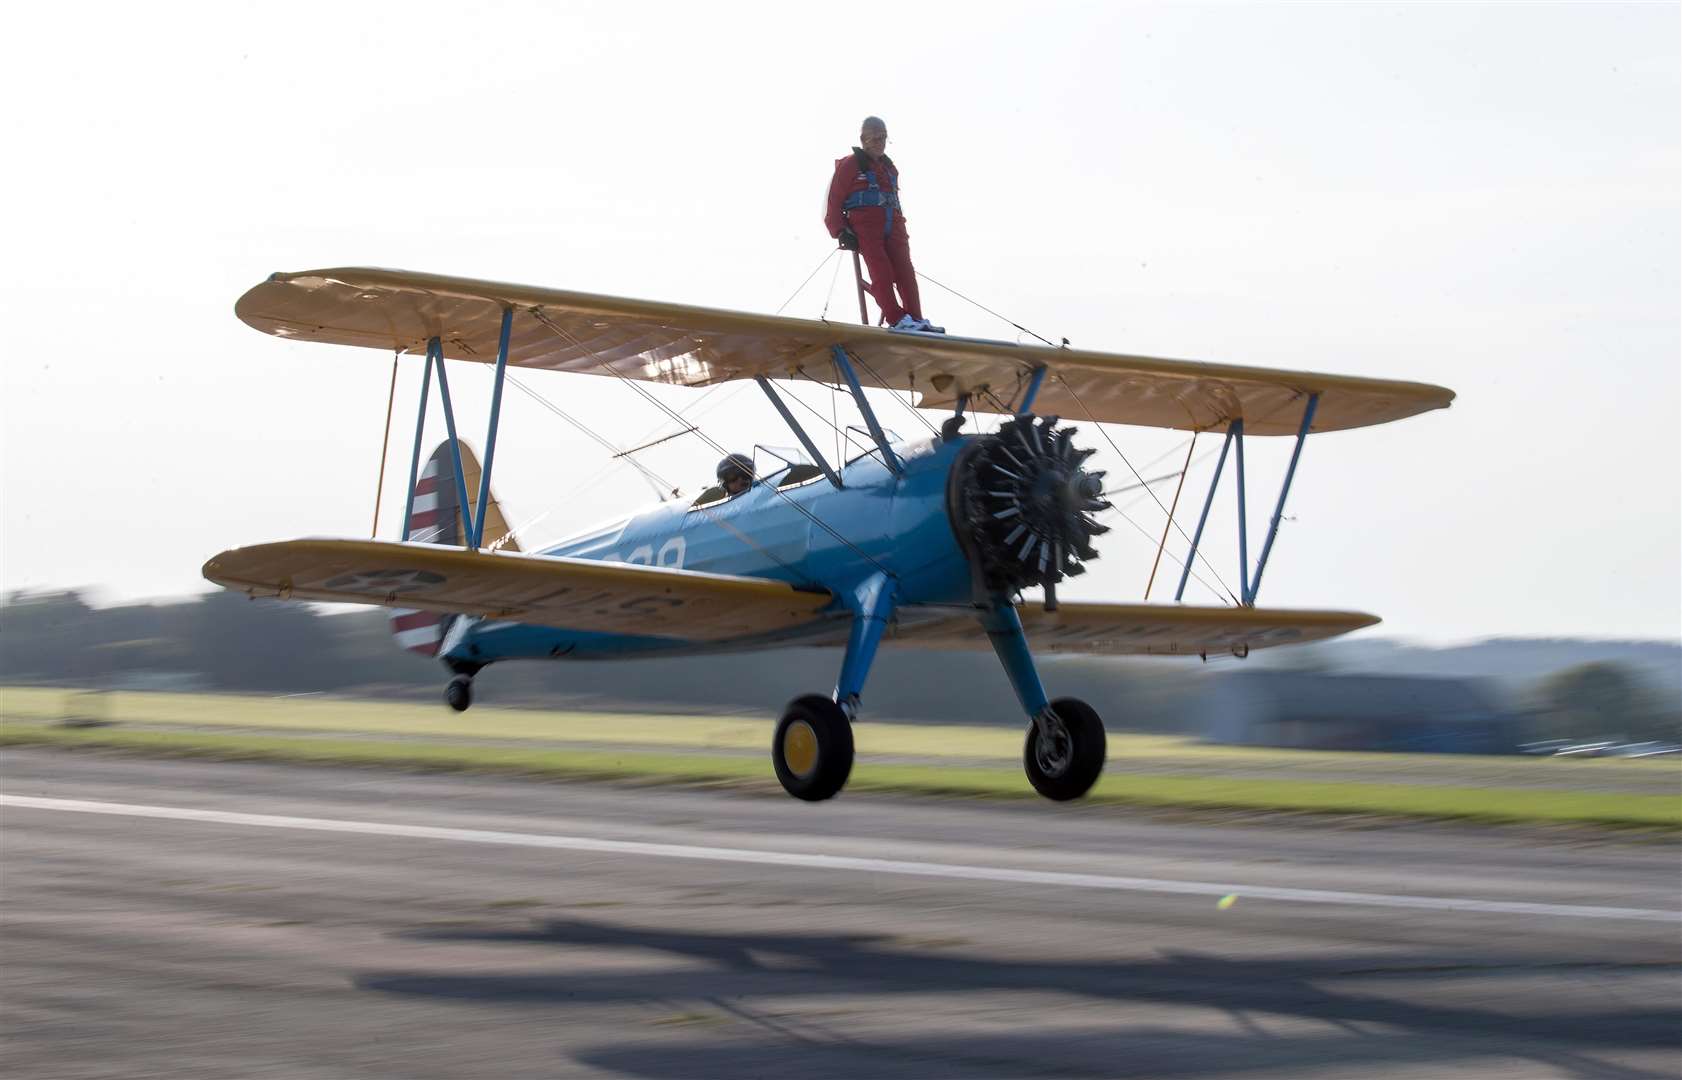 89-year-old John Wilkins takes off on his sponsored wing walk for Bristol Children’s Hospital’s The Grand Appeal at Dunkeswell Airfield near Honiton in Devon (Andrew Matthews/PA)